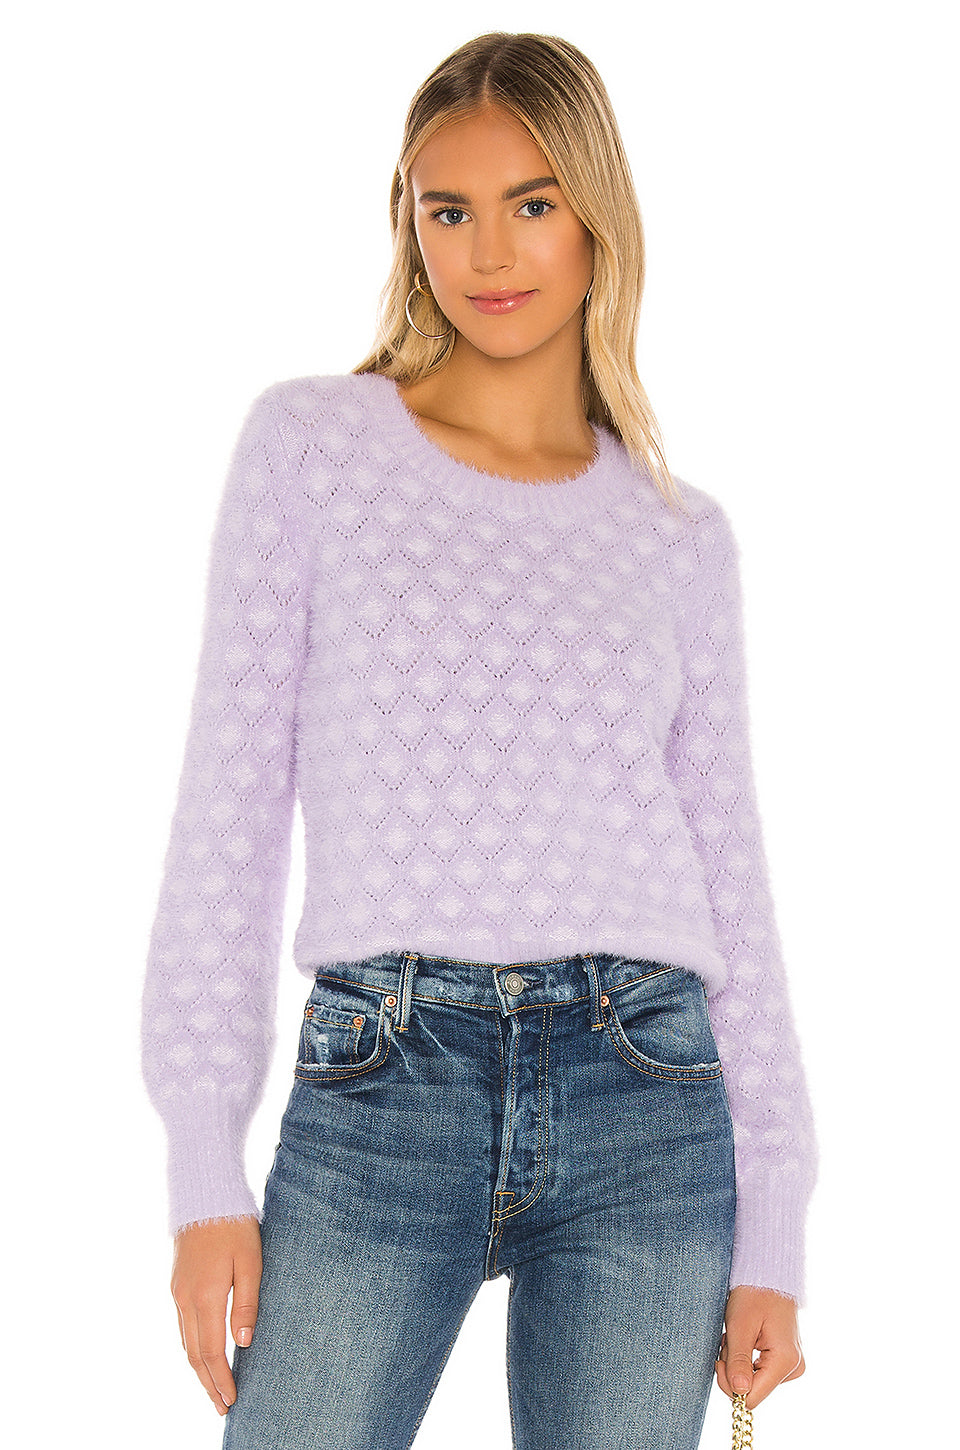 Hyperion Sweater in LILAC